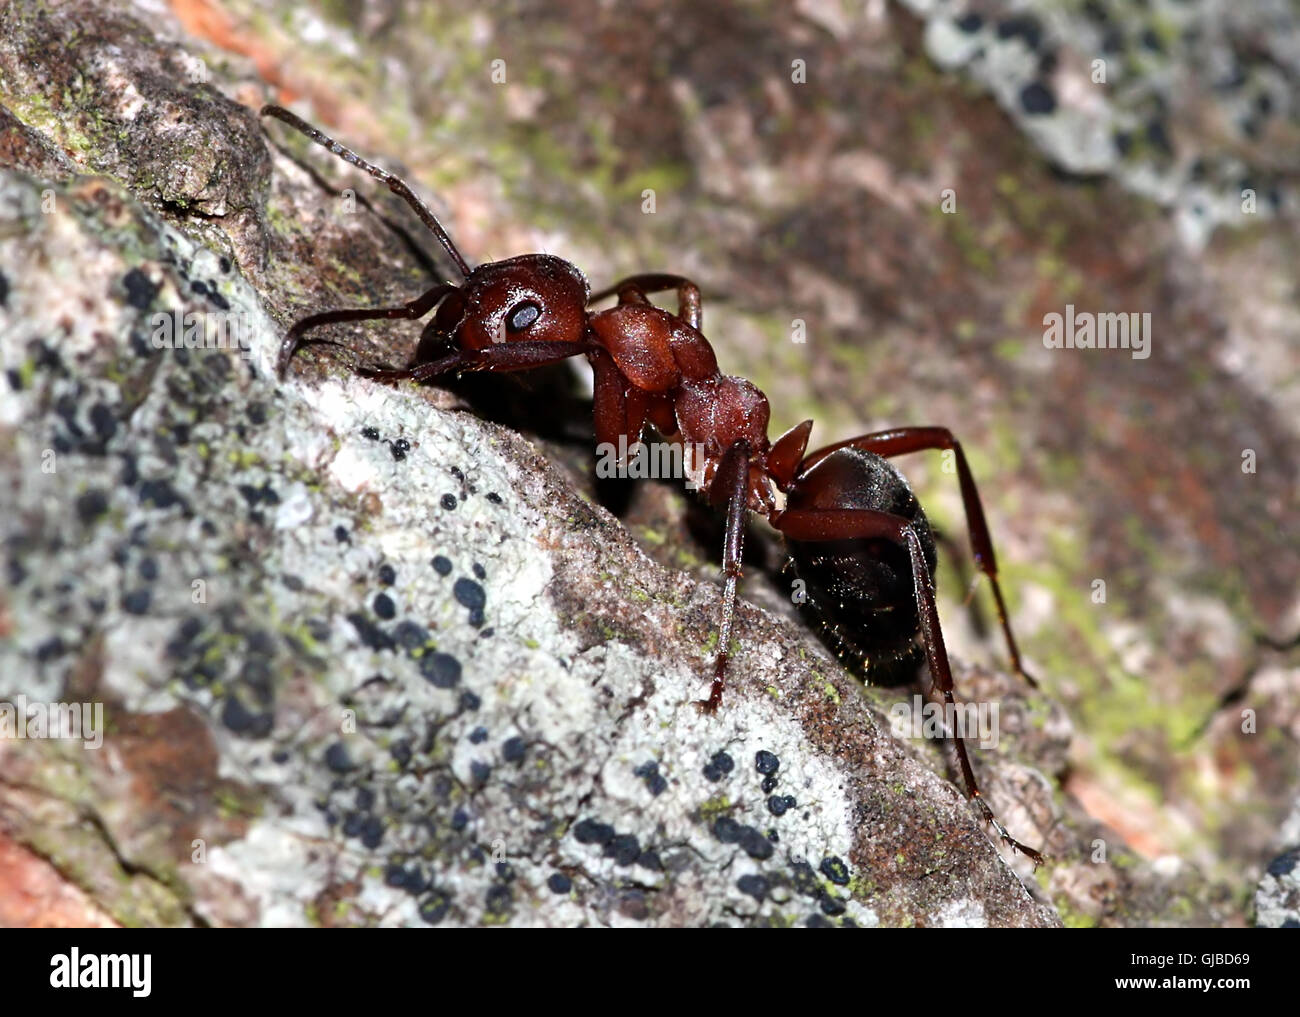 European red wood ant (Formica polyctena) seen in profile Stock Photo